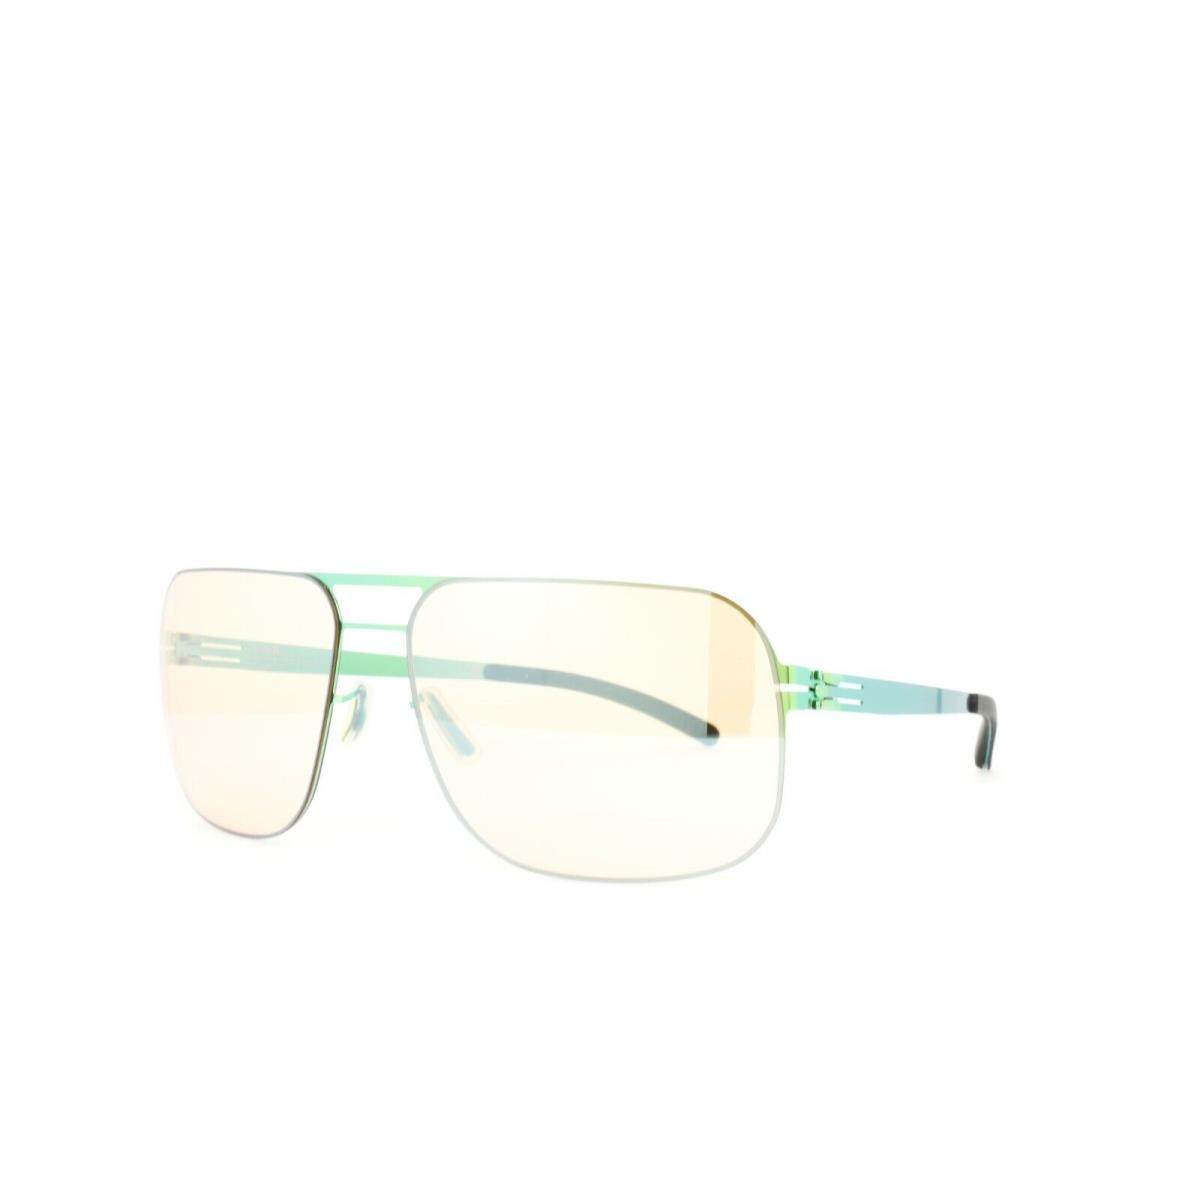 iC Berlin Sunglasses F10 Wannsee Electric-green 61-17-145